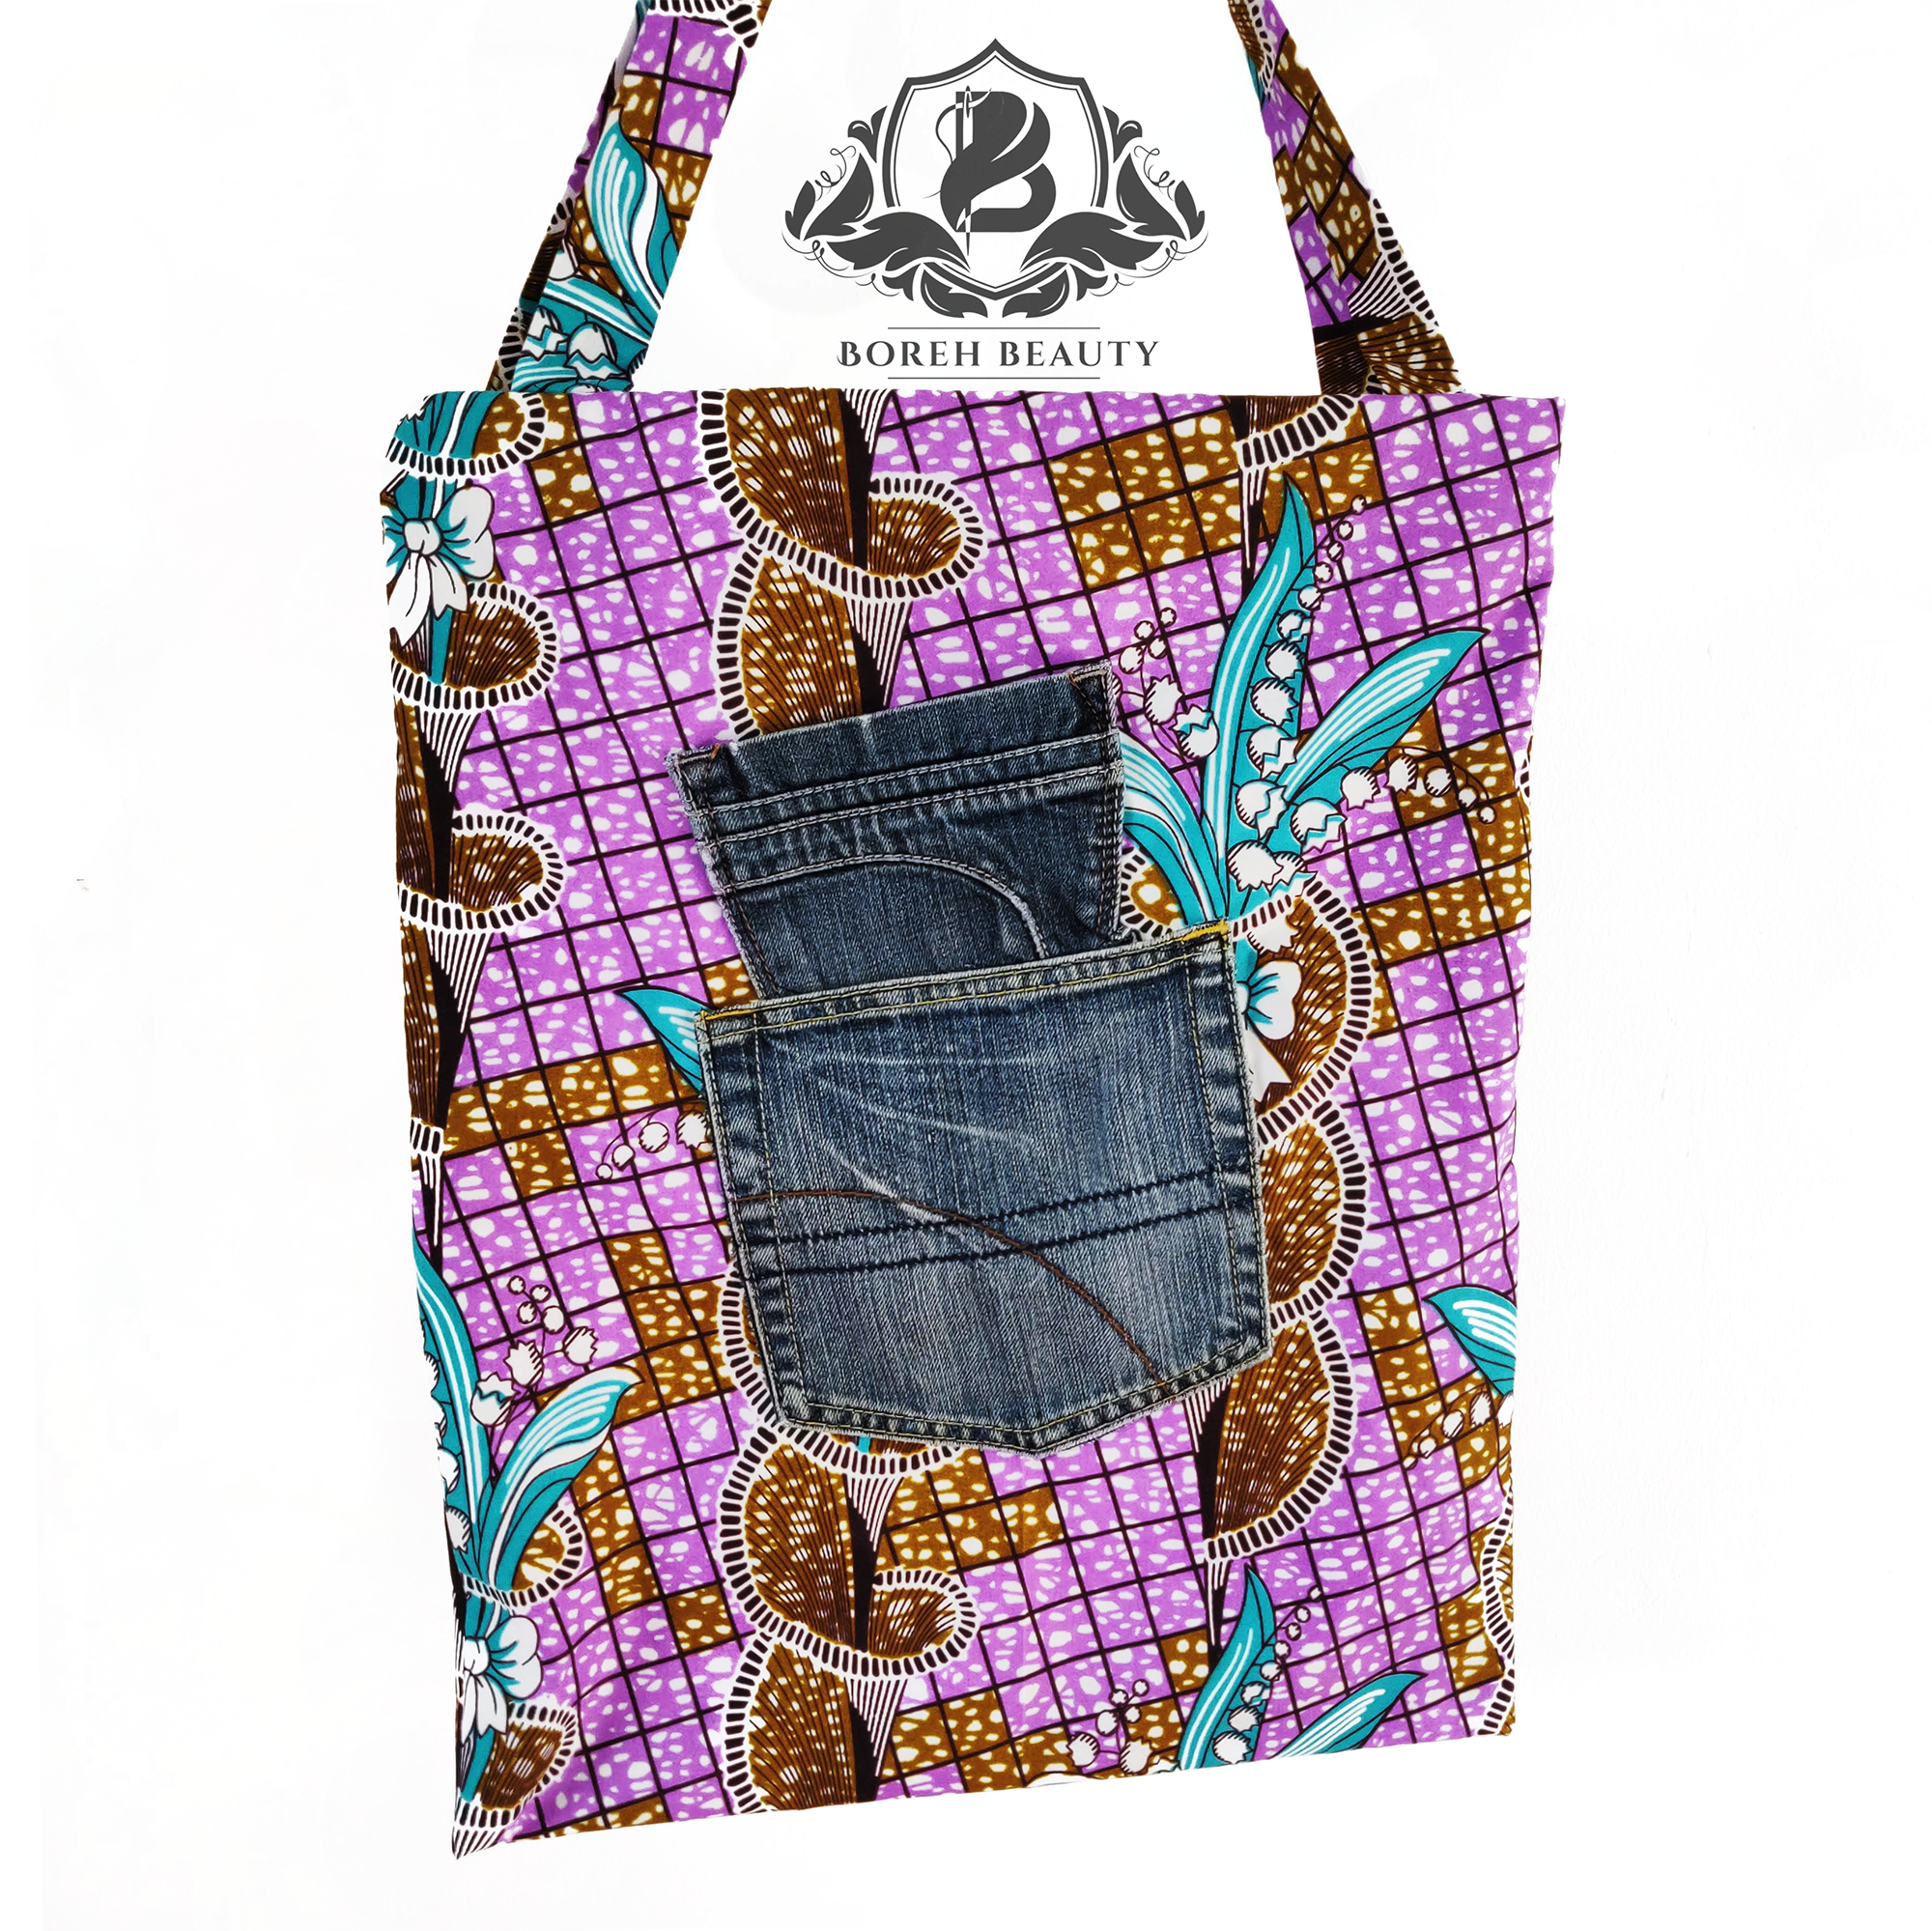 Lilac African Print Tote with Jeans Pocket